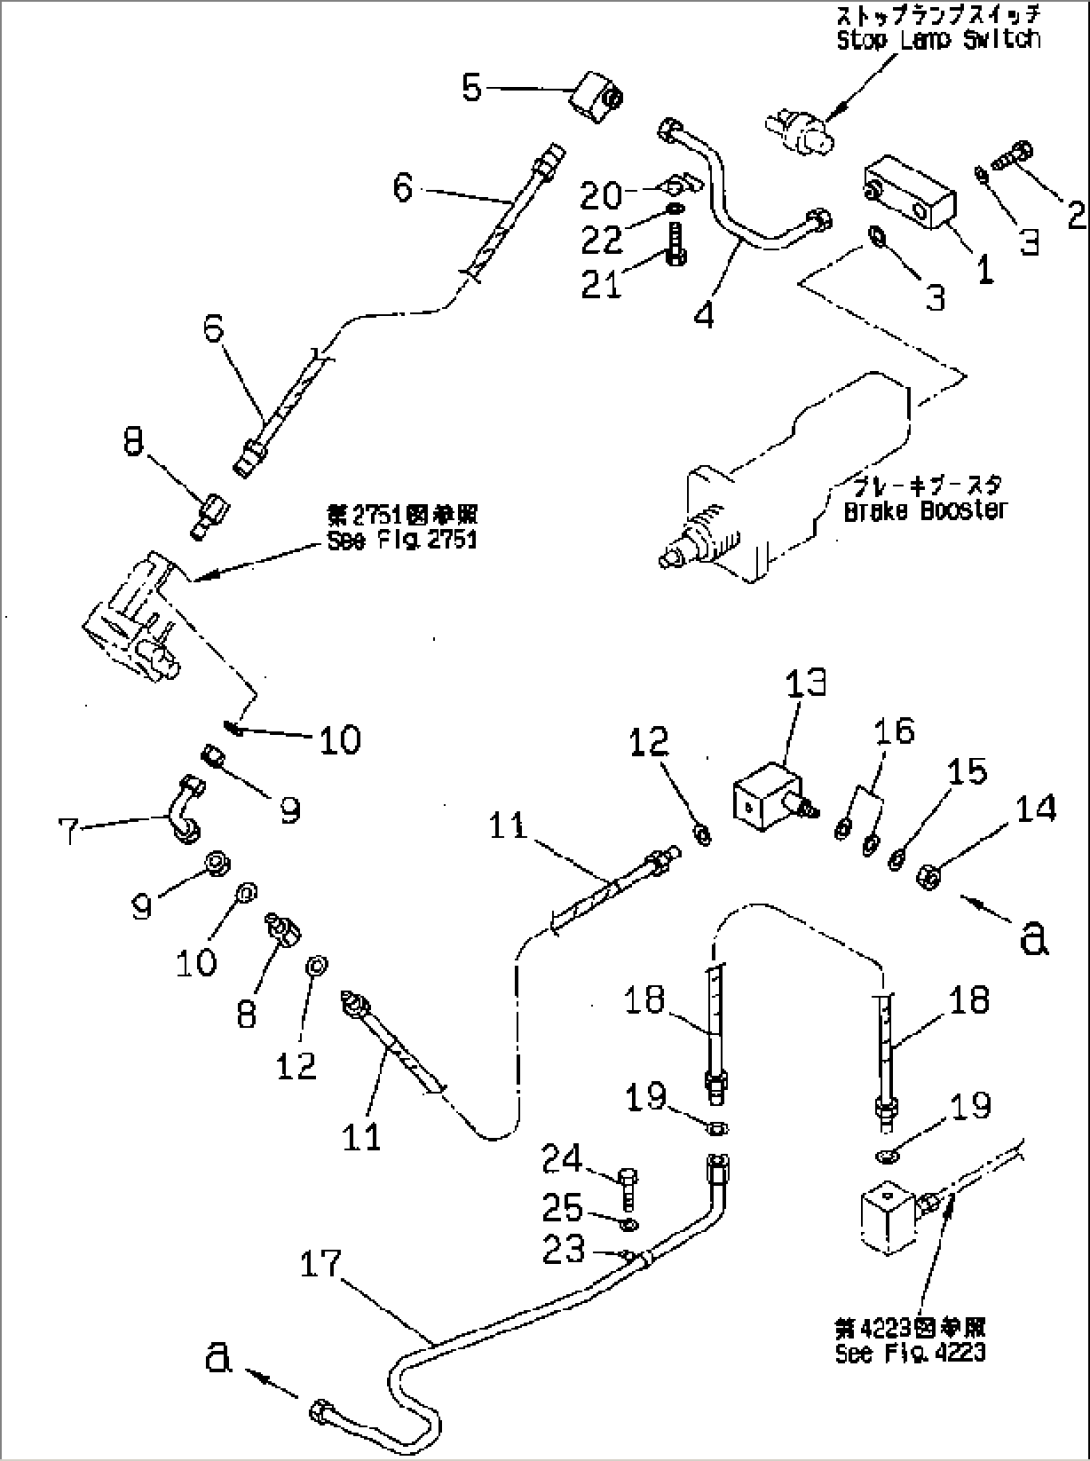 BRAKE PIPING (2/3) (BOOSTER TO JOINT)